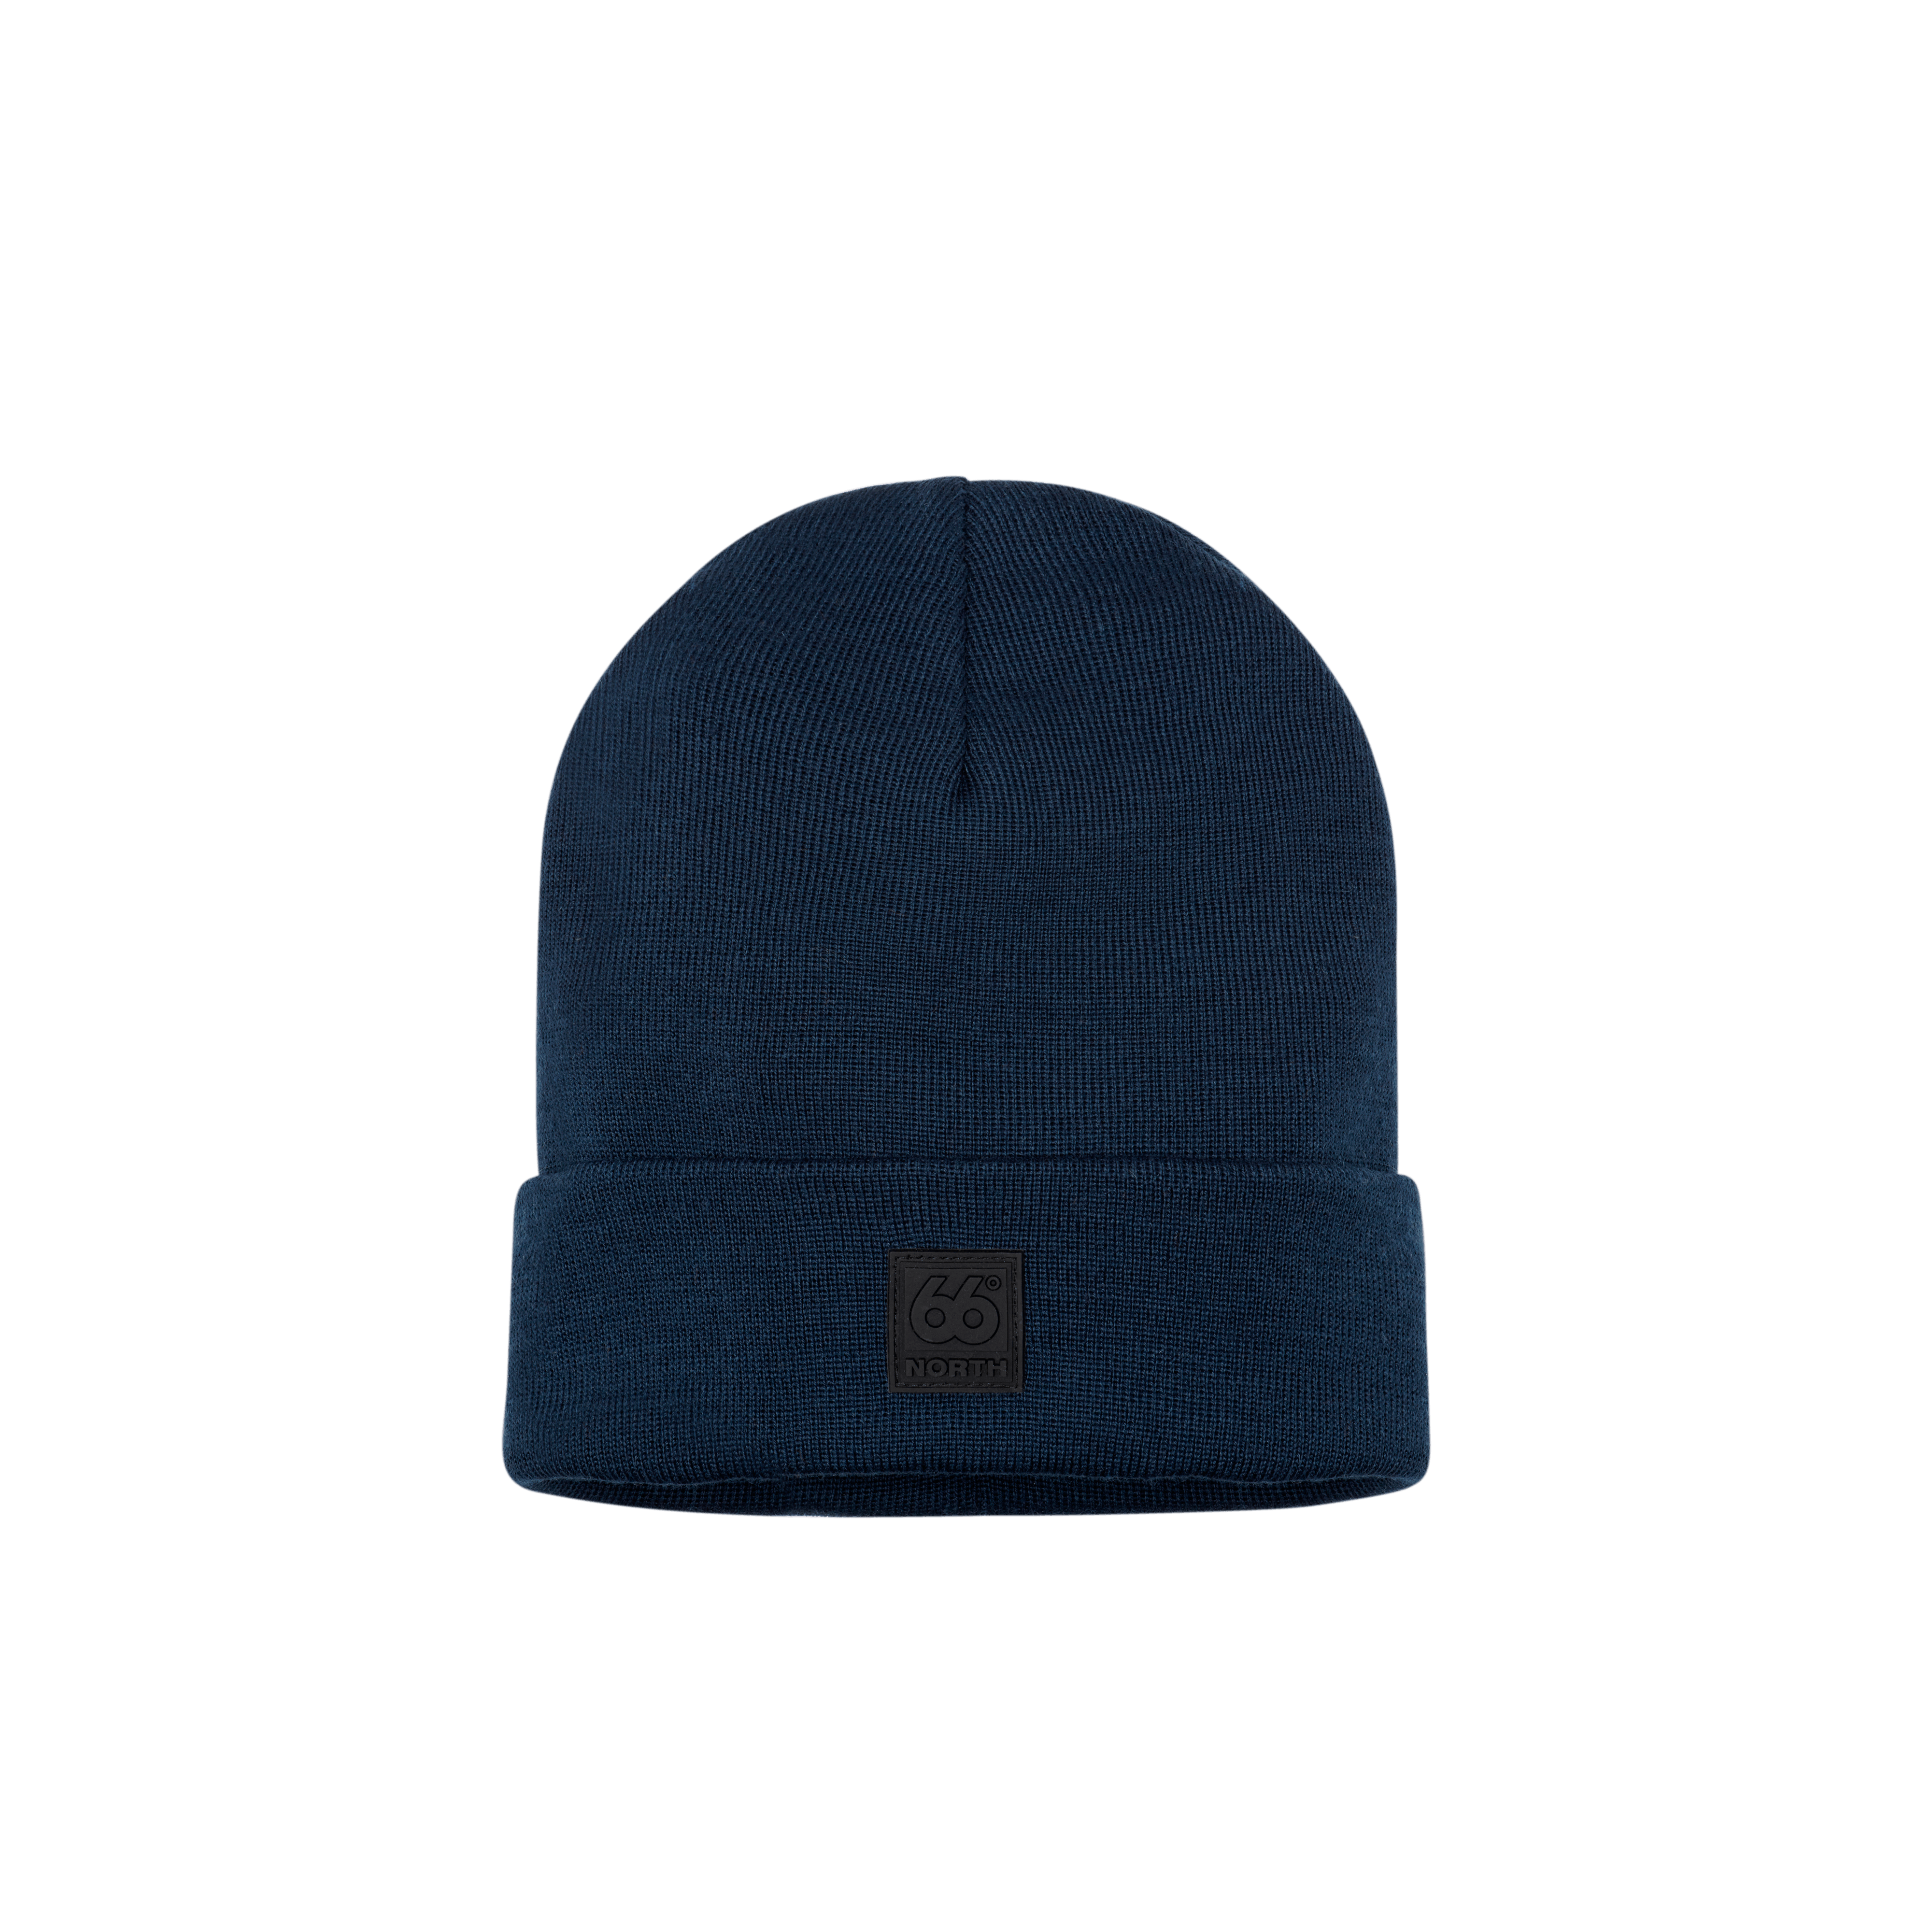 66 North Womens 66north Accessories - Navy - One Size